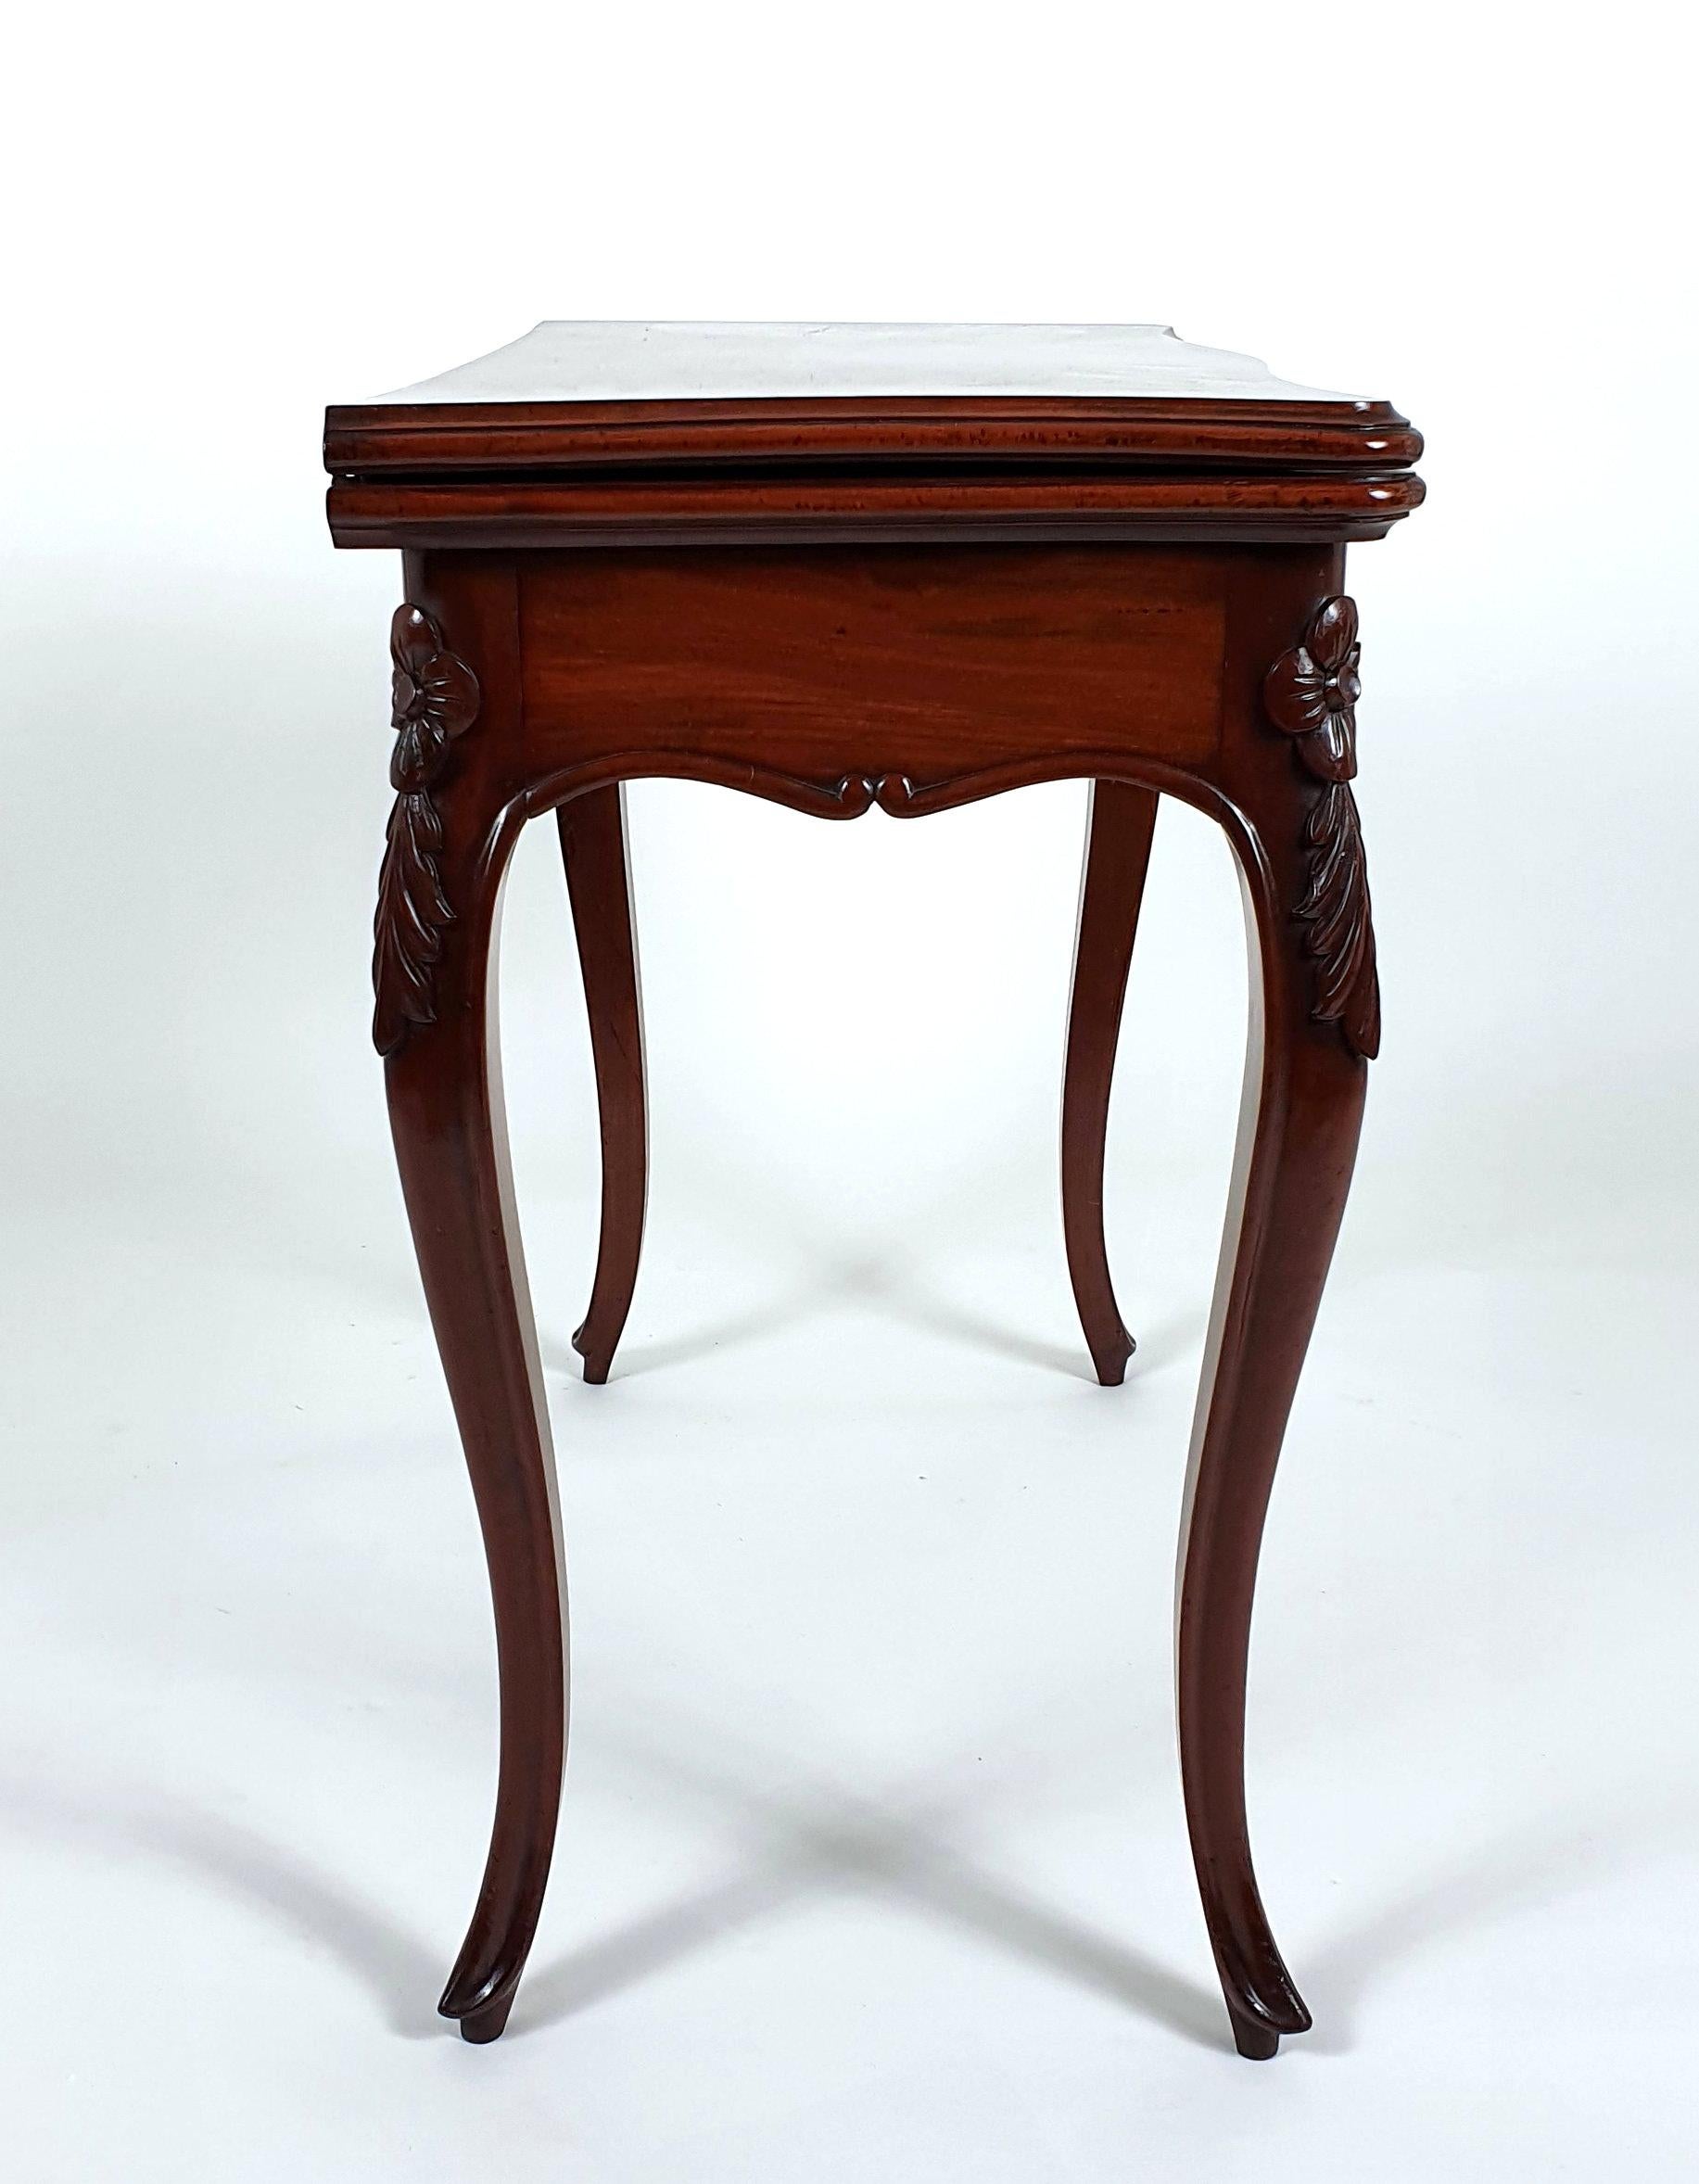 19th Century French Figured Mahogany Fold-Over Card Table For Sale 4